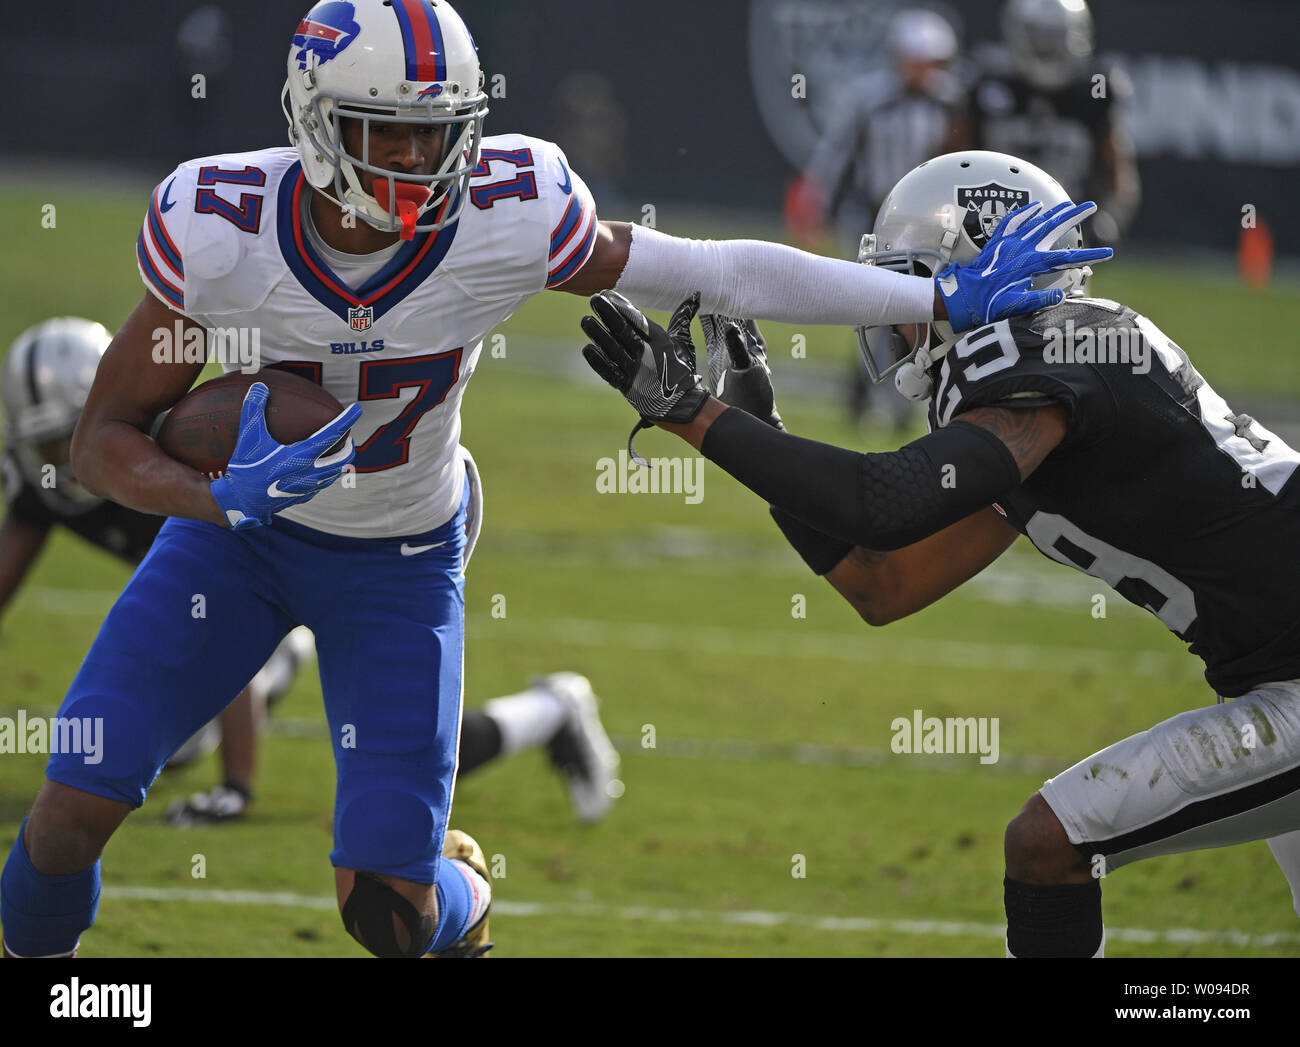 Buffalo Bills WR Justin Hunter (17) fends off Oakland Raiders David Amerson (29) in the first quarter at the Oakland Coliseum in Oakland, California on December 4, 2016. The Raiders defeated the Bills 38-24.         Photo by Terry Schmitt/UPI Stock Photo